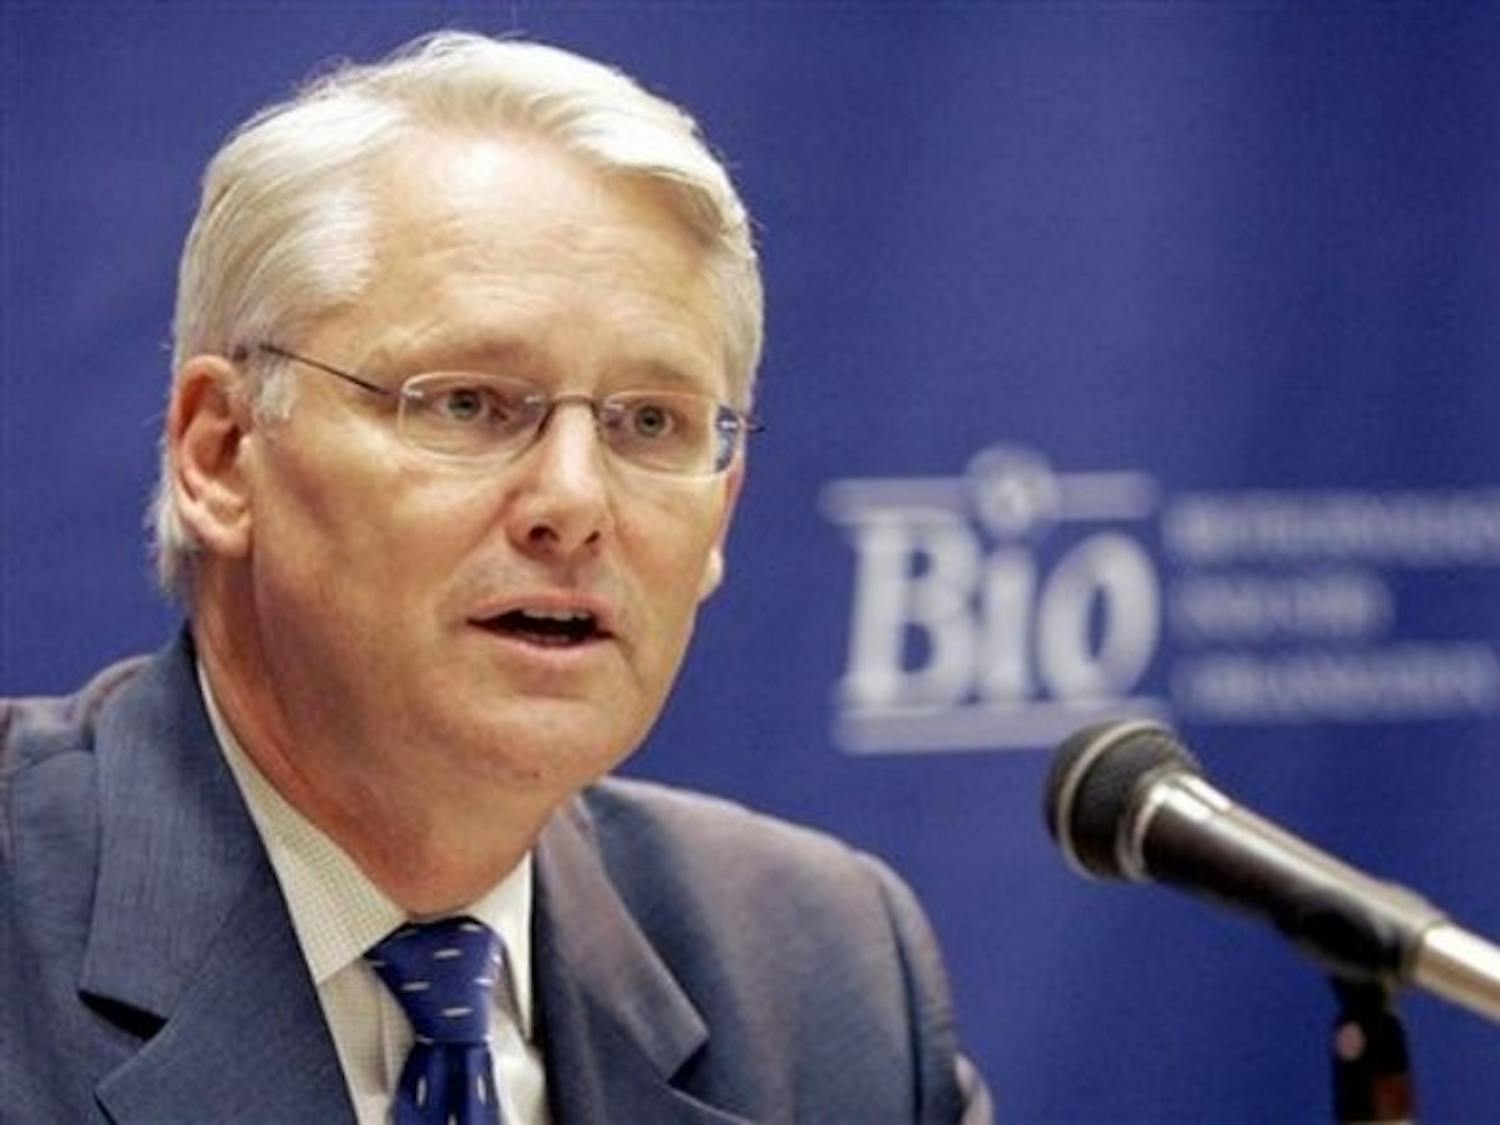 Gordon Campbell '70 won reelection as primier of British Columbia.